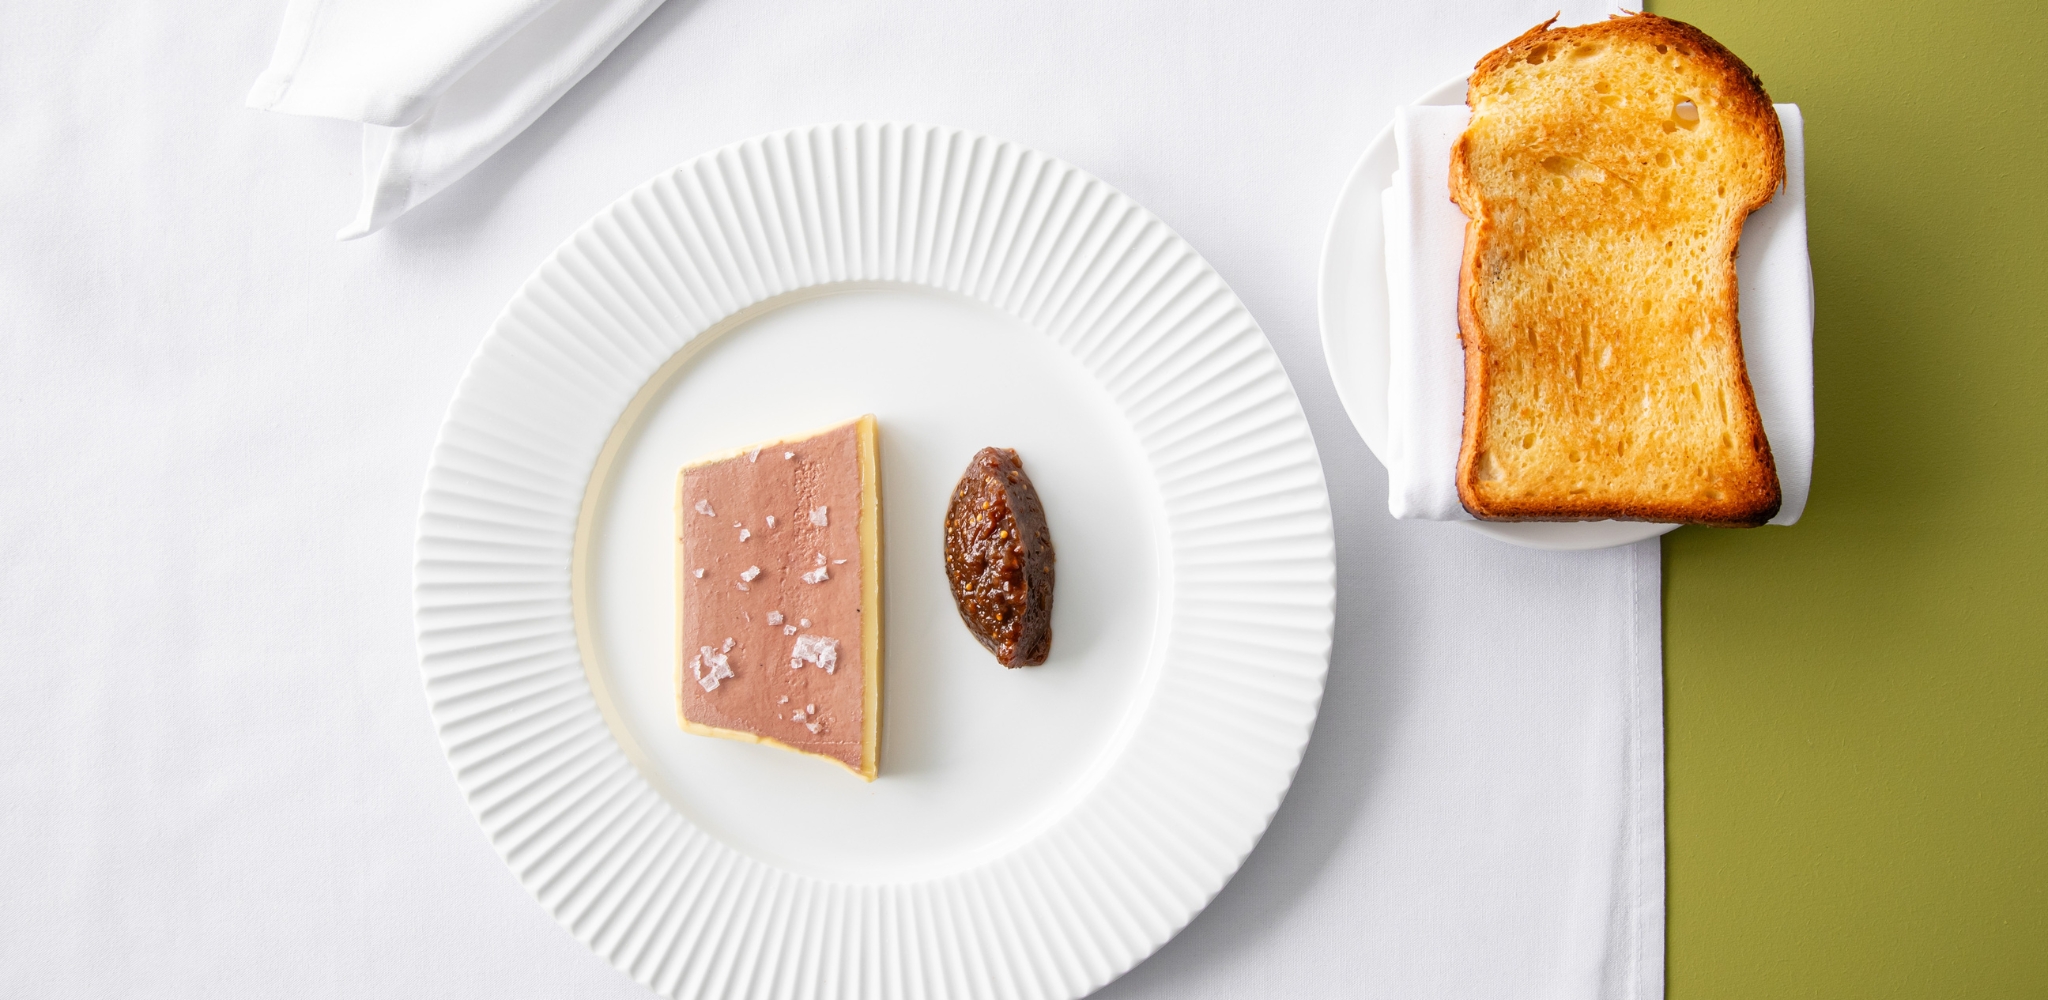 Image of Jacksons on George's chicken liver parfait with bitter orange puree on a white plate with toasted brioche slice on a side plate with white napkin.